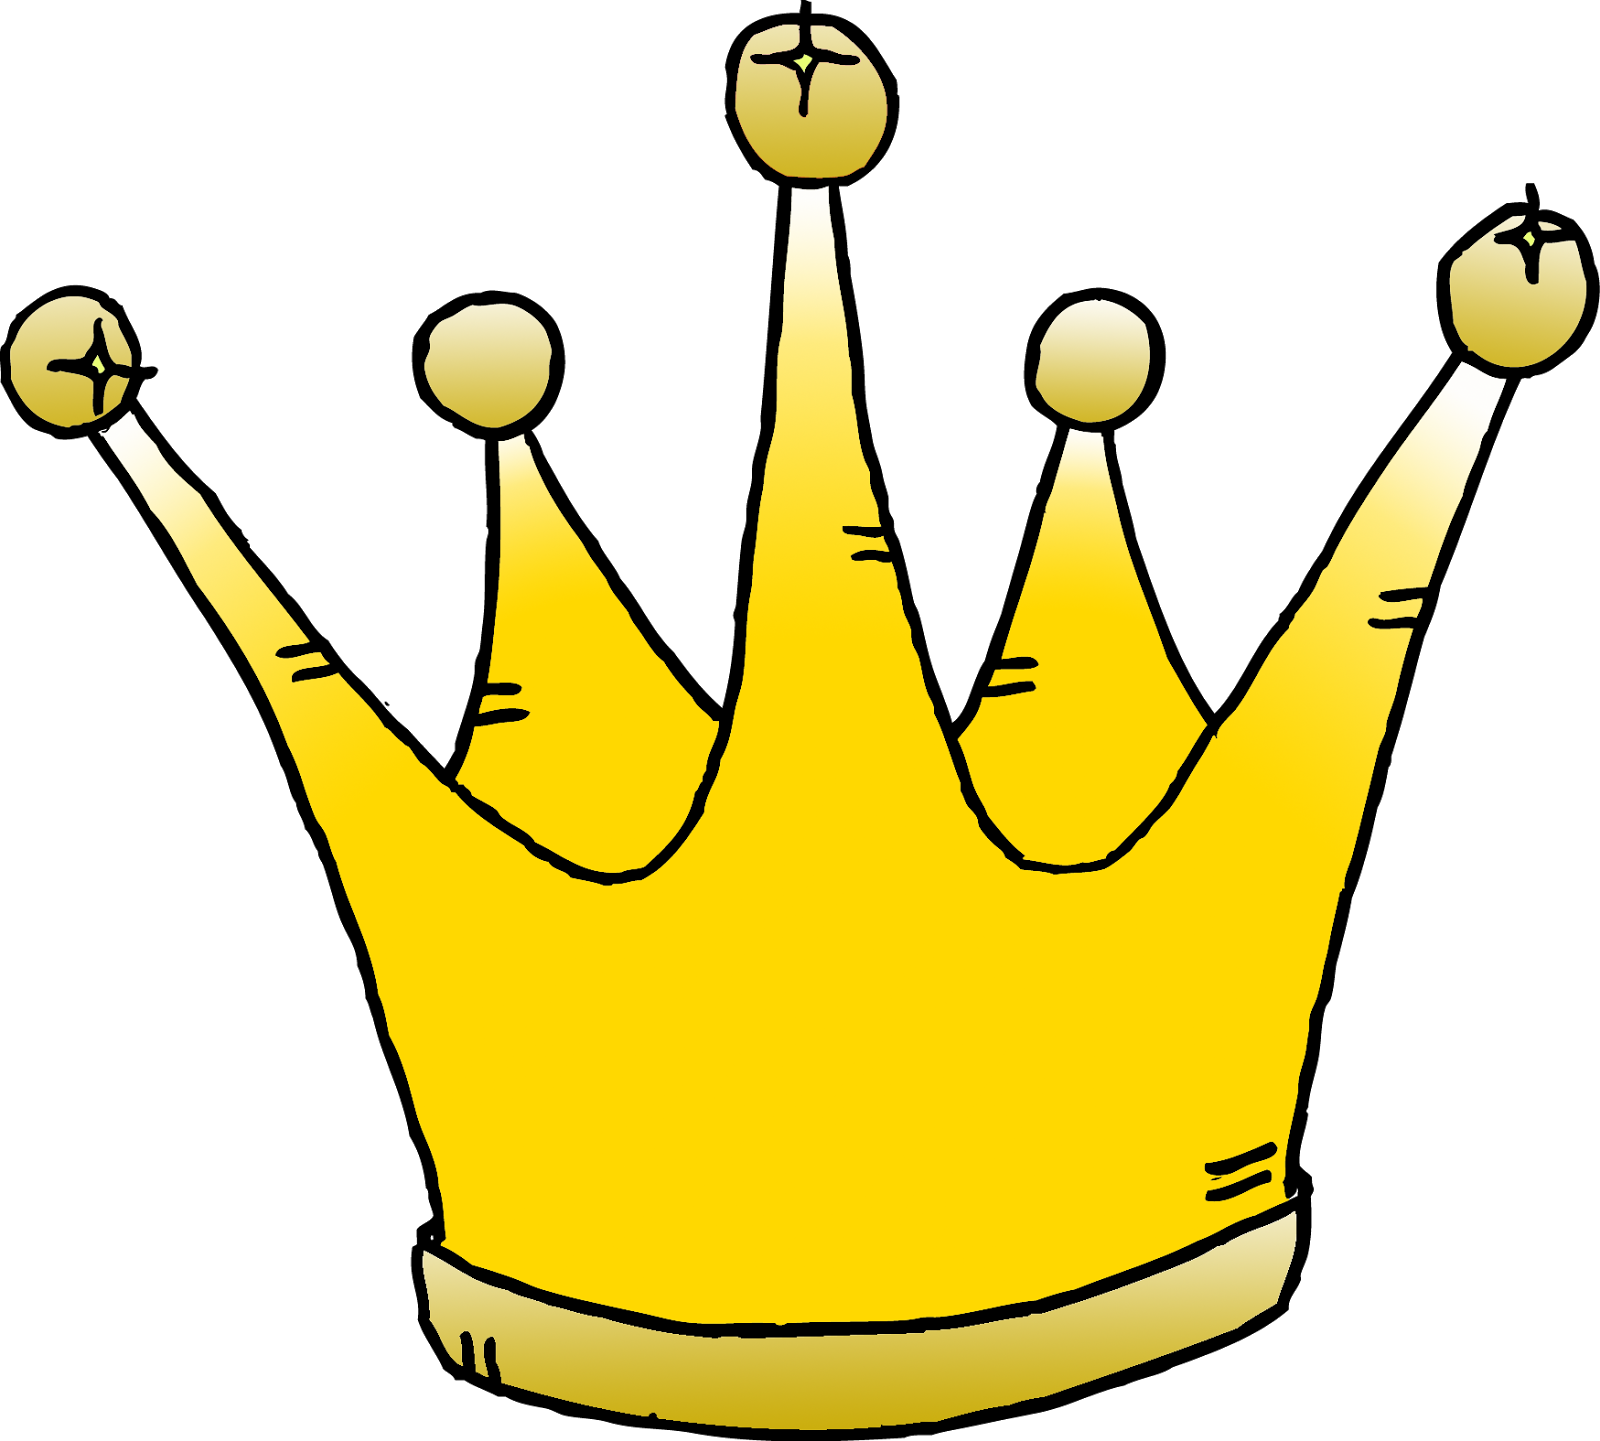 free crown picture clip art - photo #42